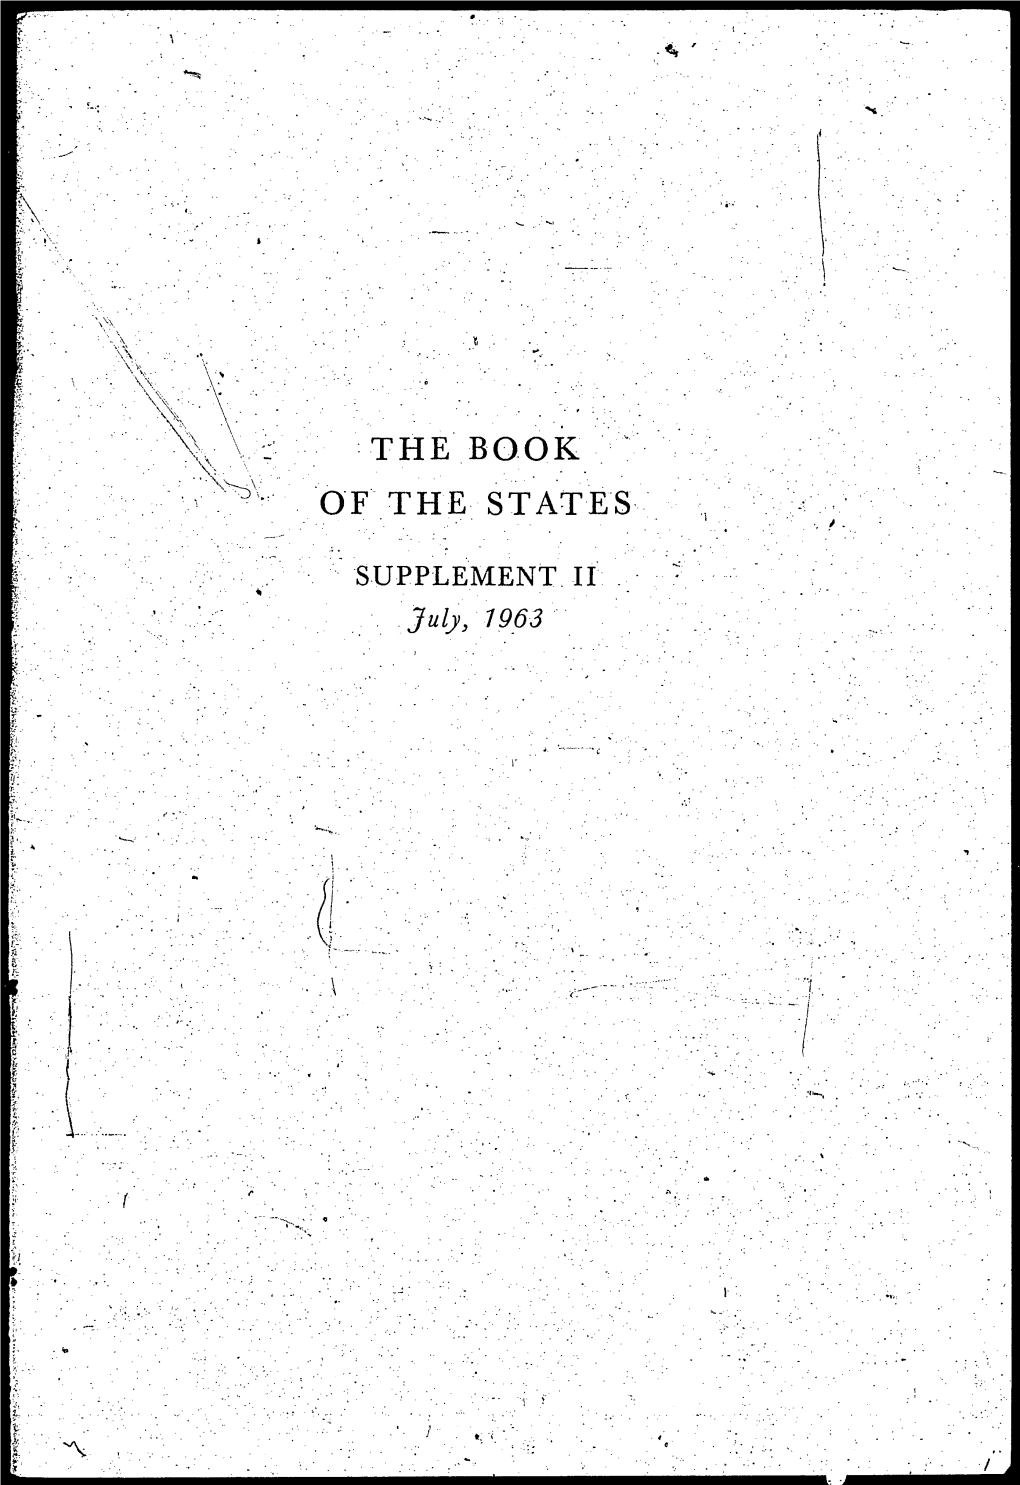 THE BOOK of the STATES Y